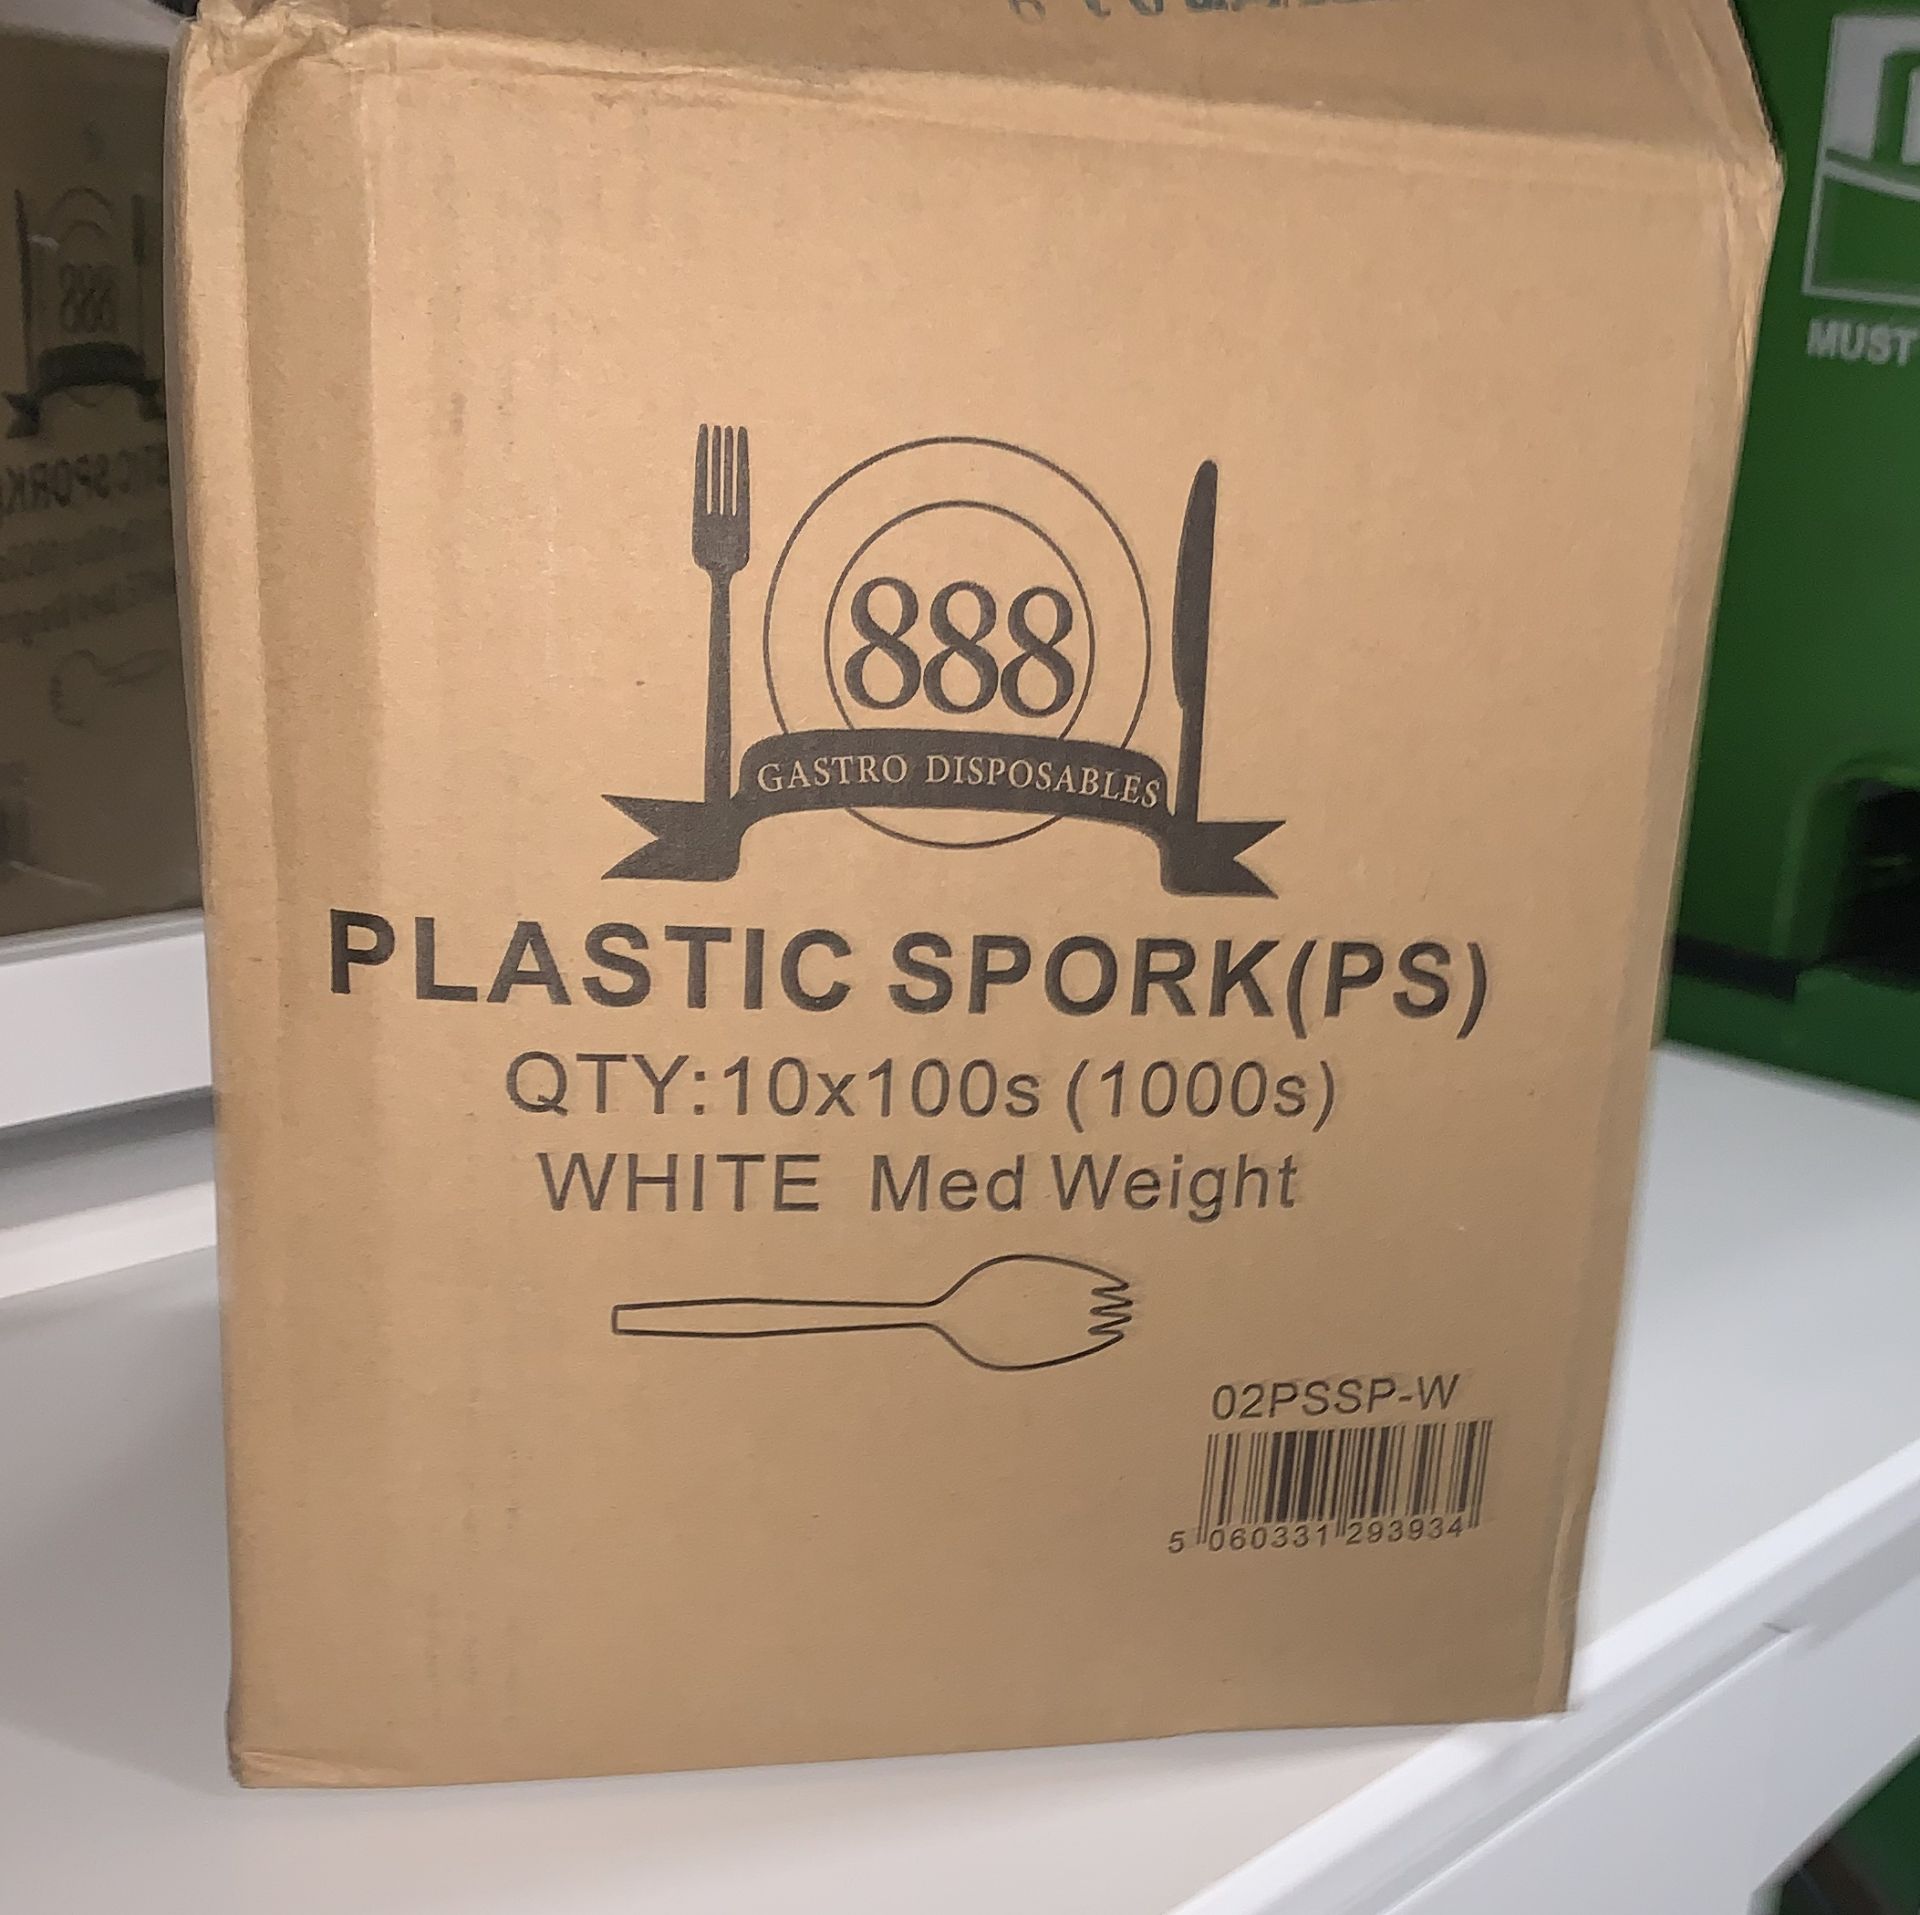 2 x Boxes of 1000 Plastic Sporks by 888 Gastro Disposables | DSP14 - Image 2 of 6